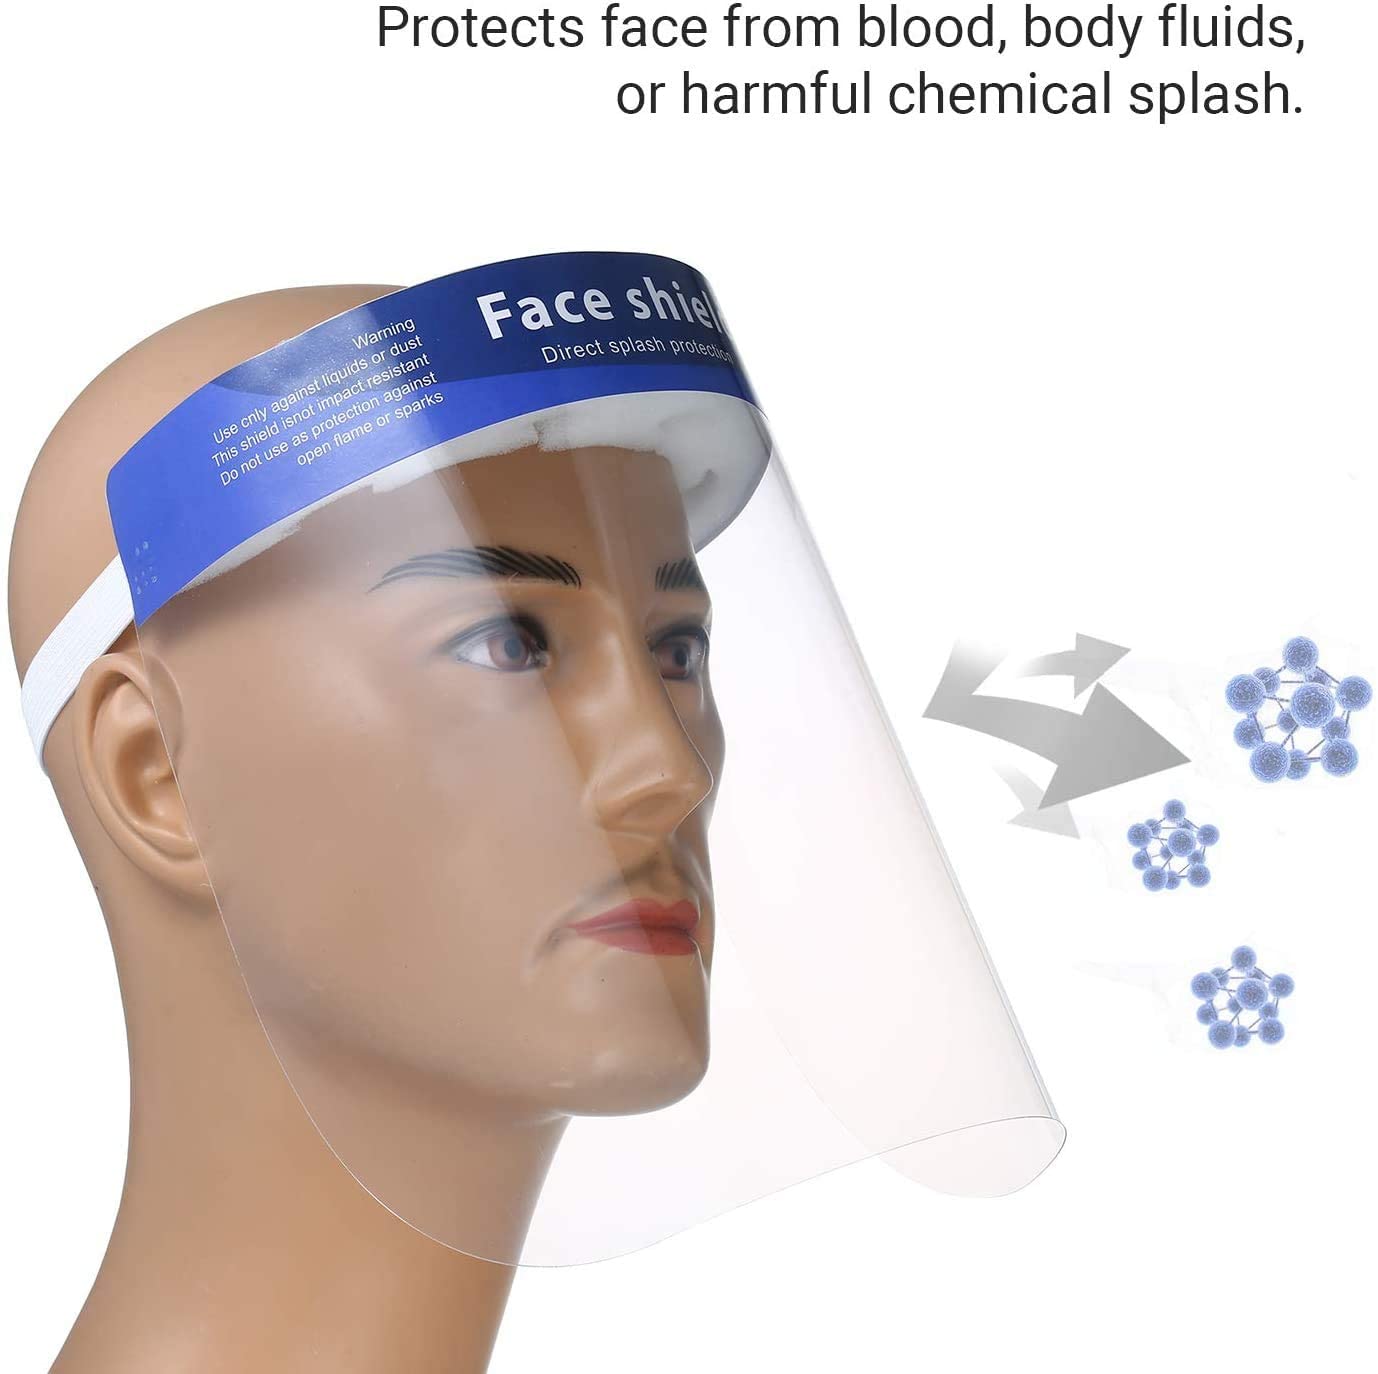 Safety Face Shield, Transparent Full Face Protective Masks Anti-Spitting/Anti-Dust/Anti-Flu Facial Cover for Women Men Adjustable Visor Eye & Head Protection